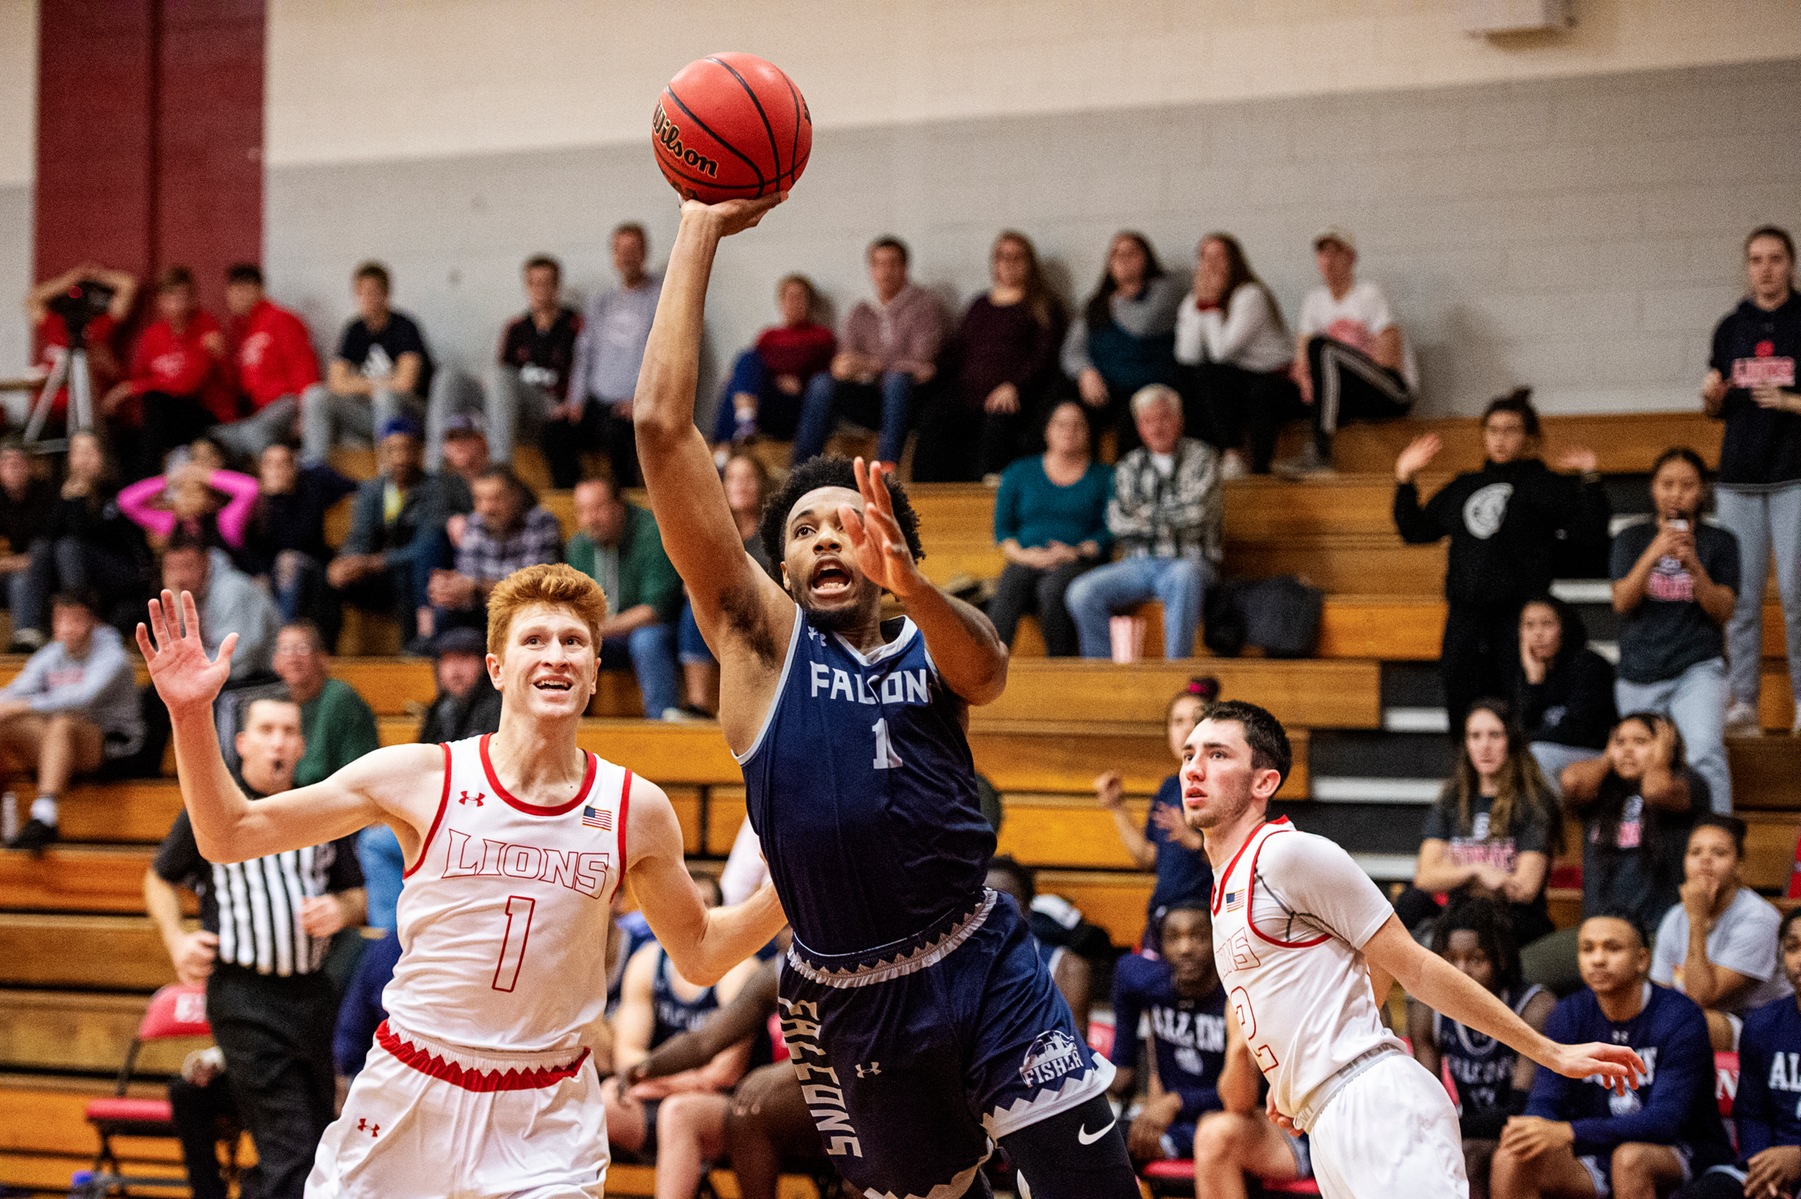 Men's Basketball: Falcons earn 77-72 OT win in tune-up for the tournament